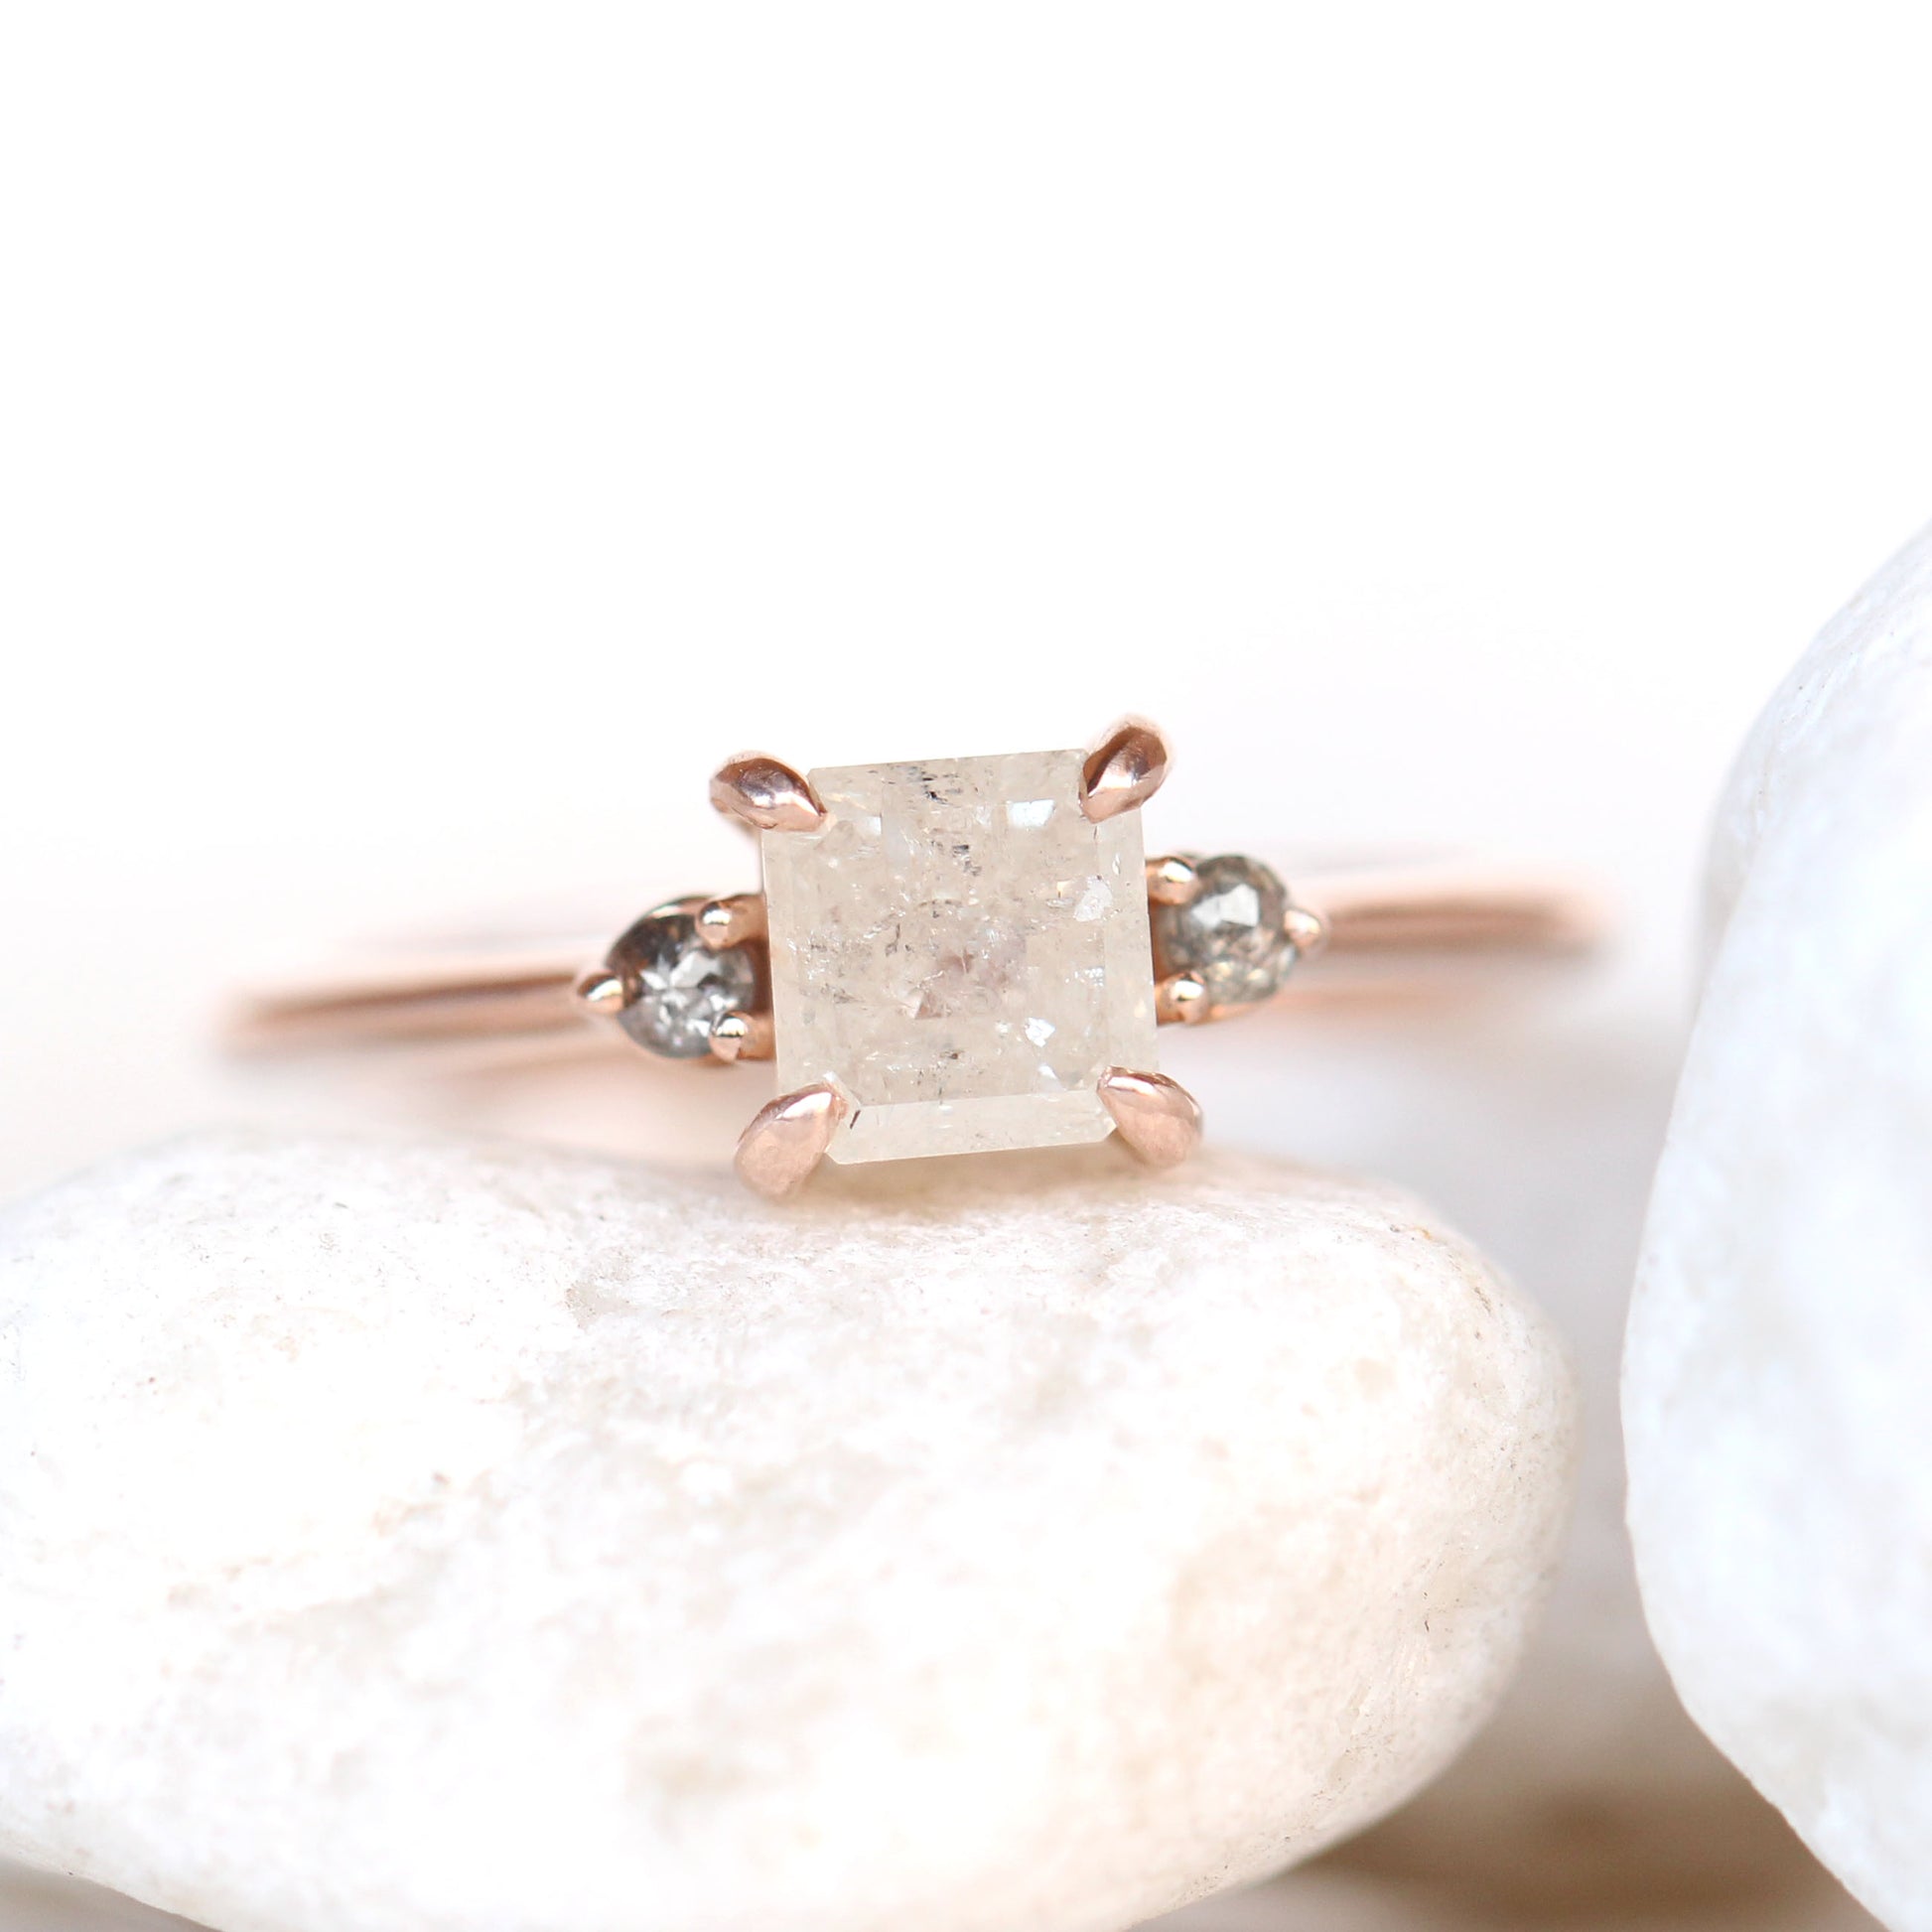 Drea Ring with a 1.07 Princess Misty White Round Celestial Diamond and Celestial Diamond Accents in 14k Rose Gold - Ready to Size and Ship - Midwinter Co. Alternative Bridal Rings and Modern Fine Jewelry